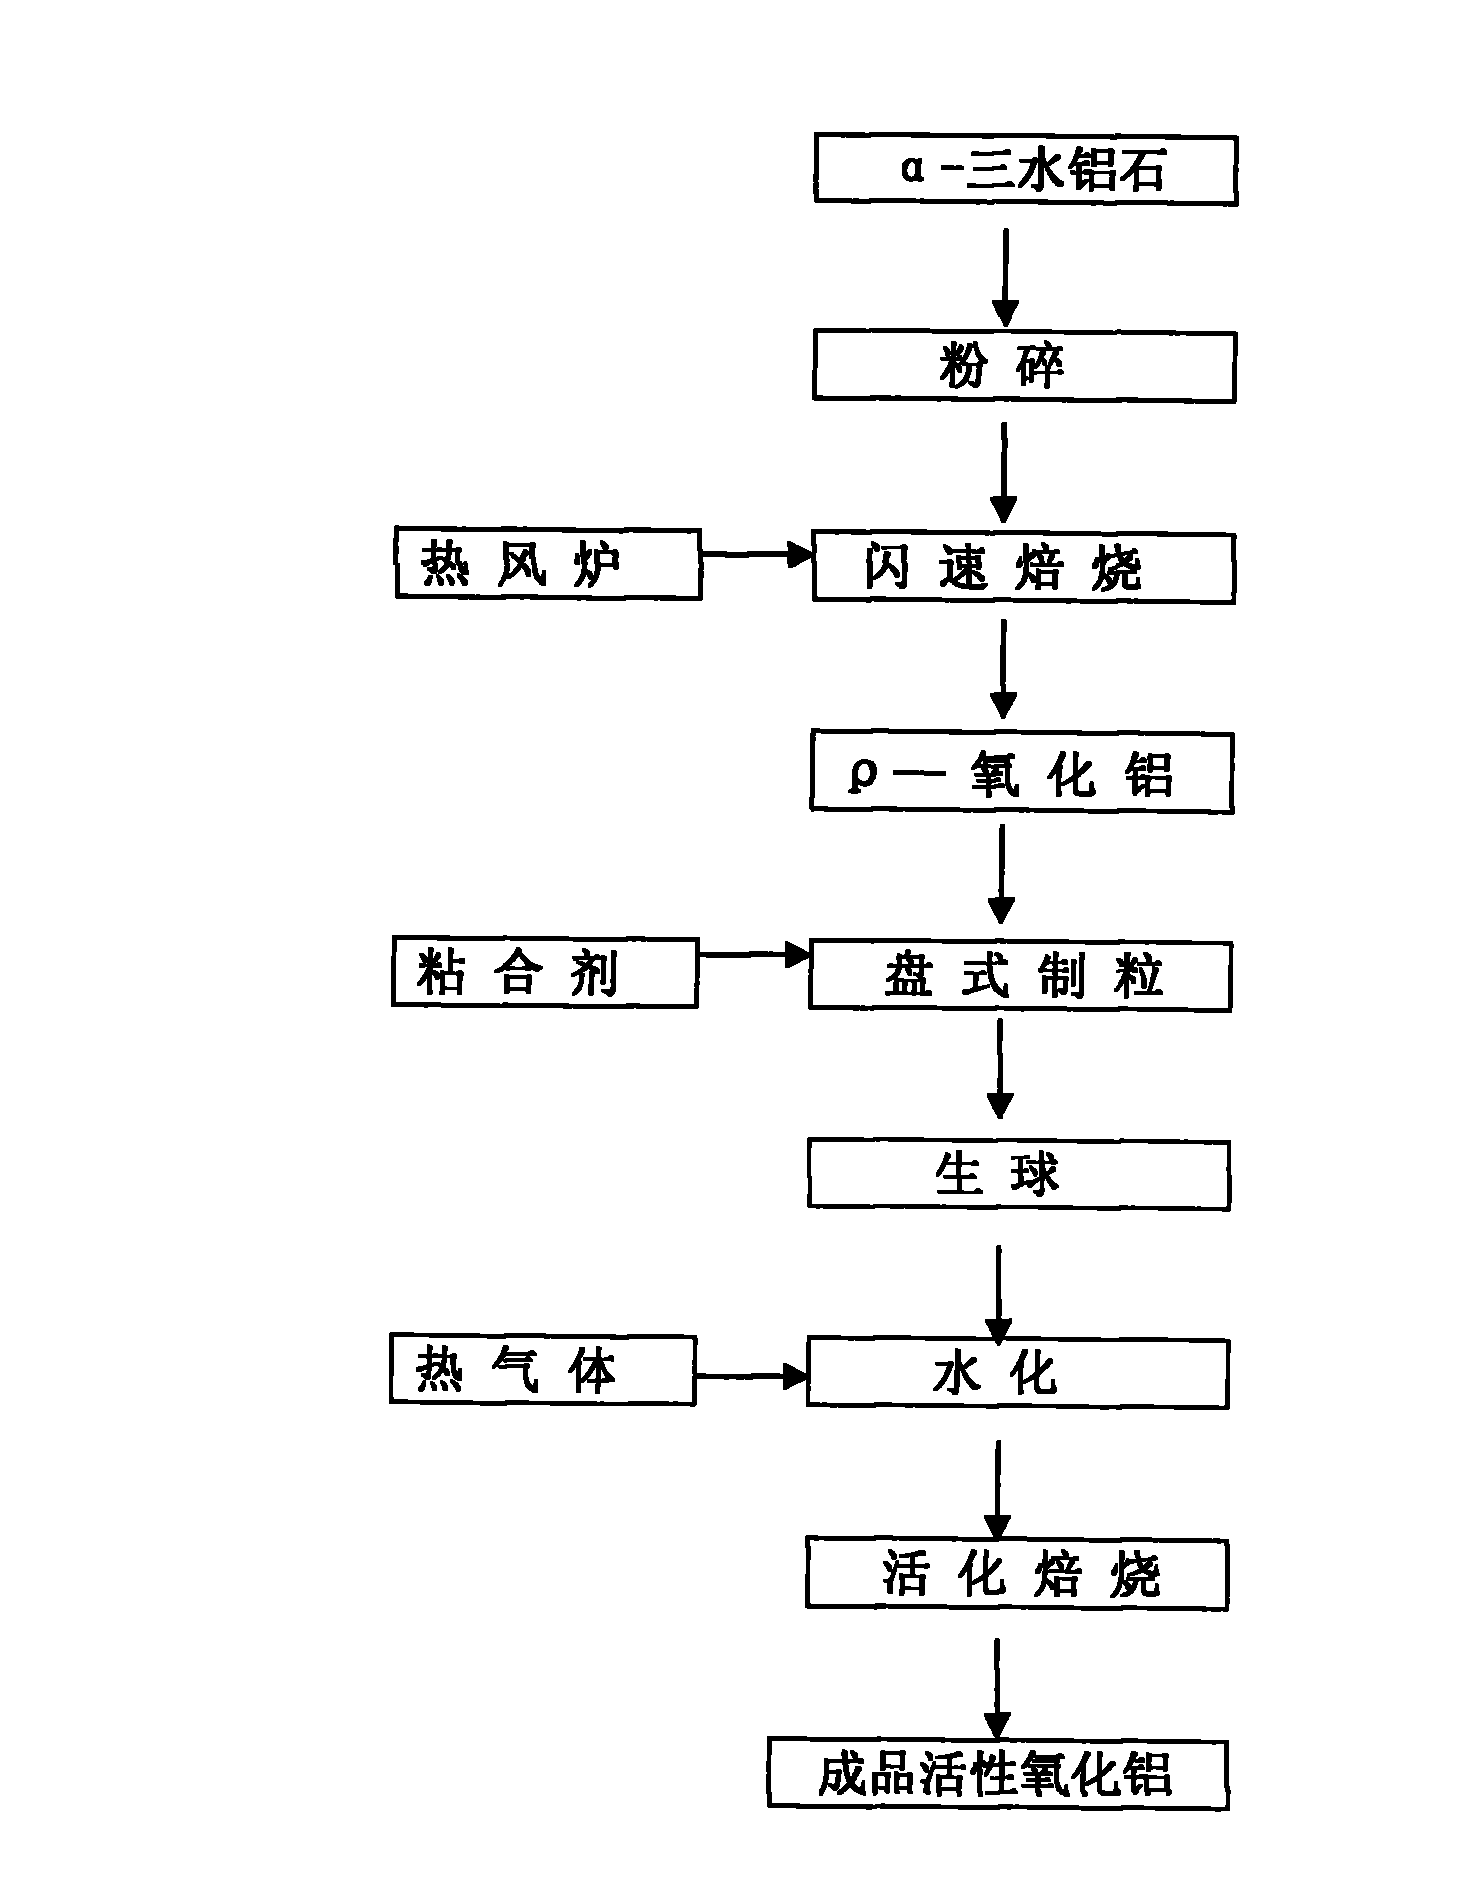 Preparation method of antitoxin suitable for high pressure conversion